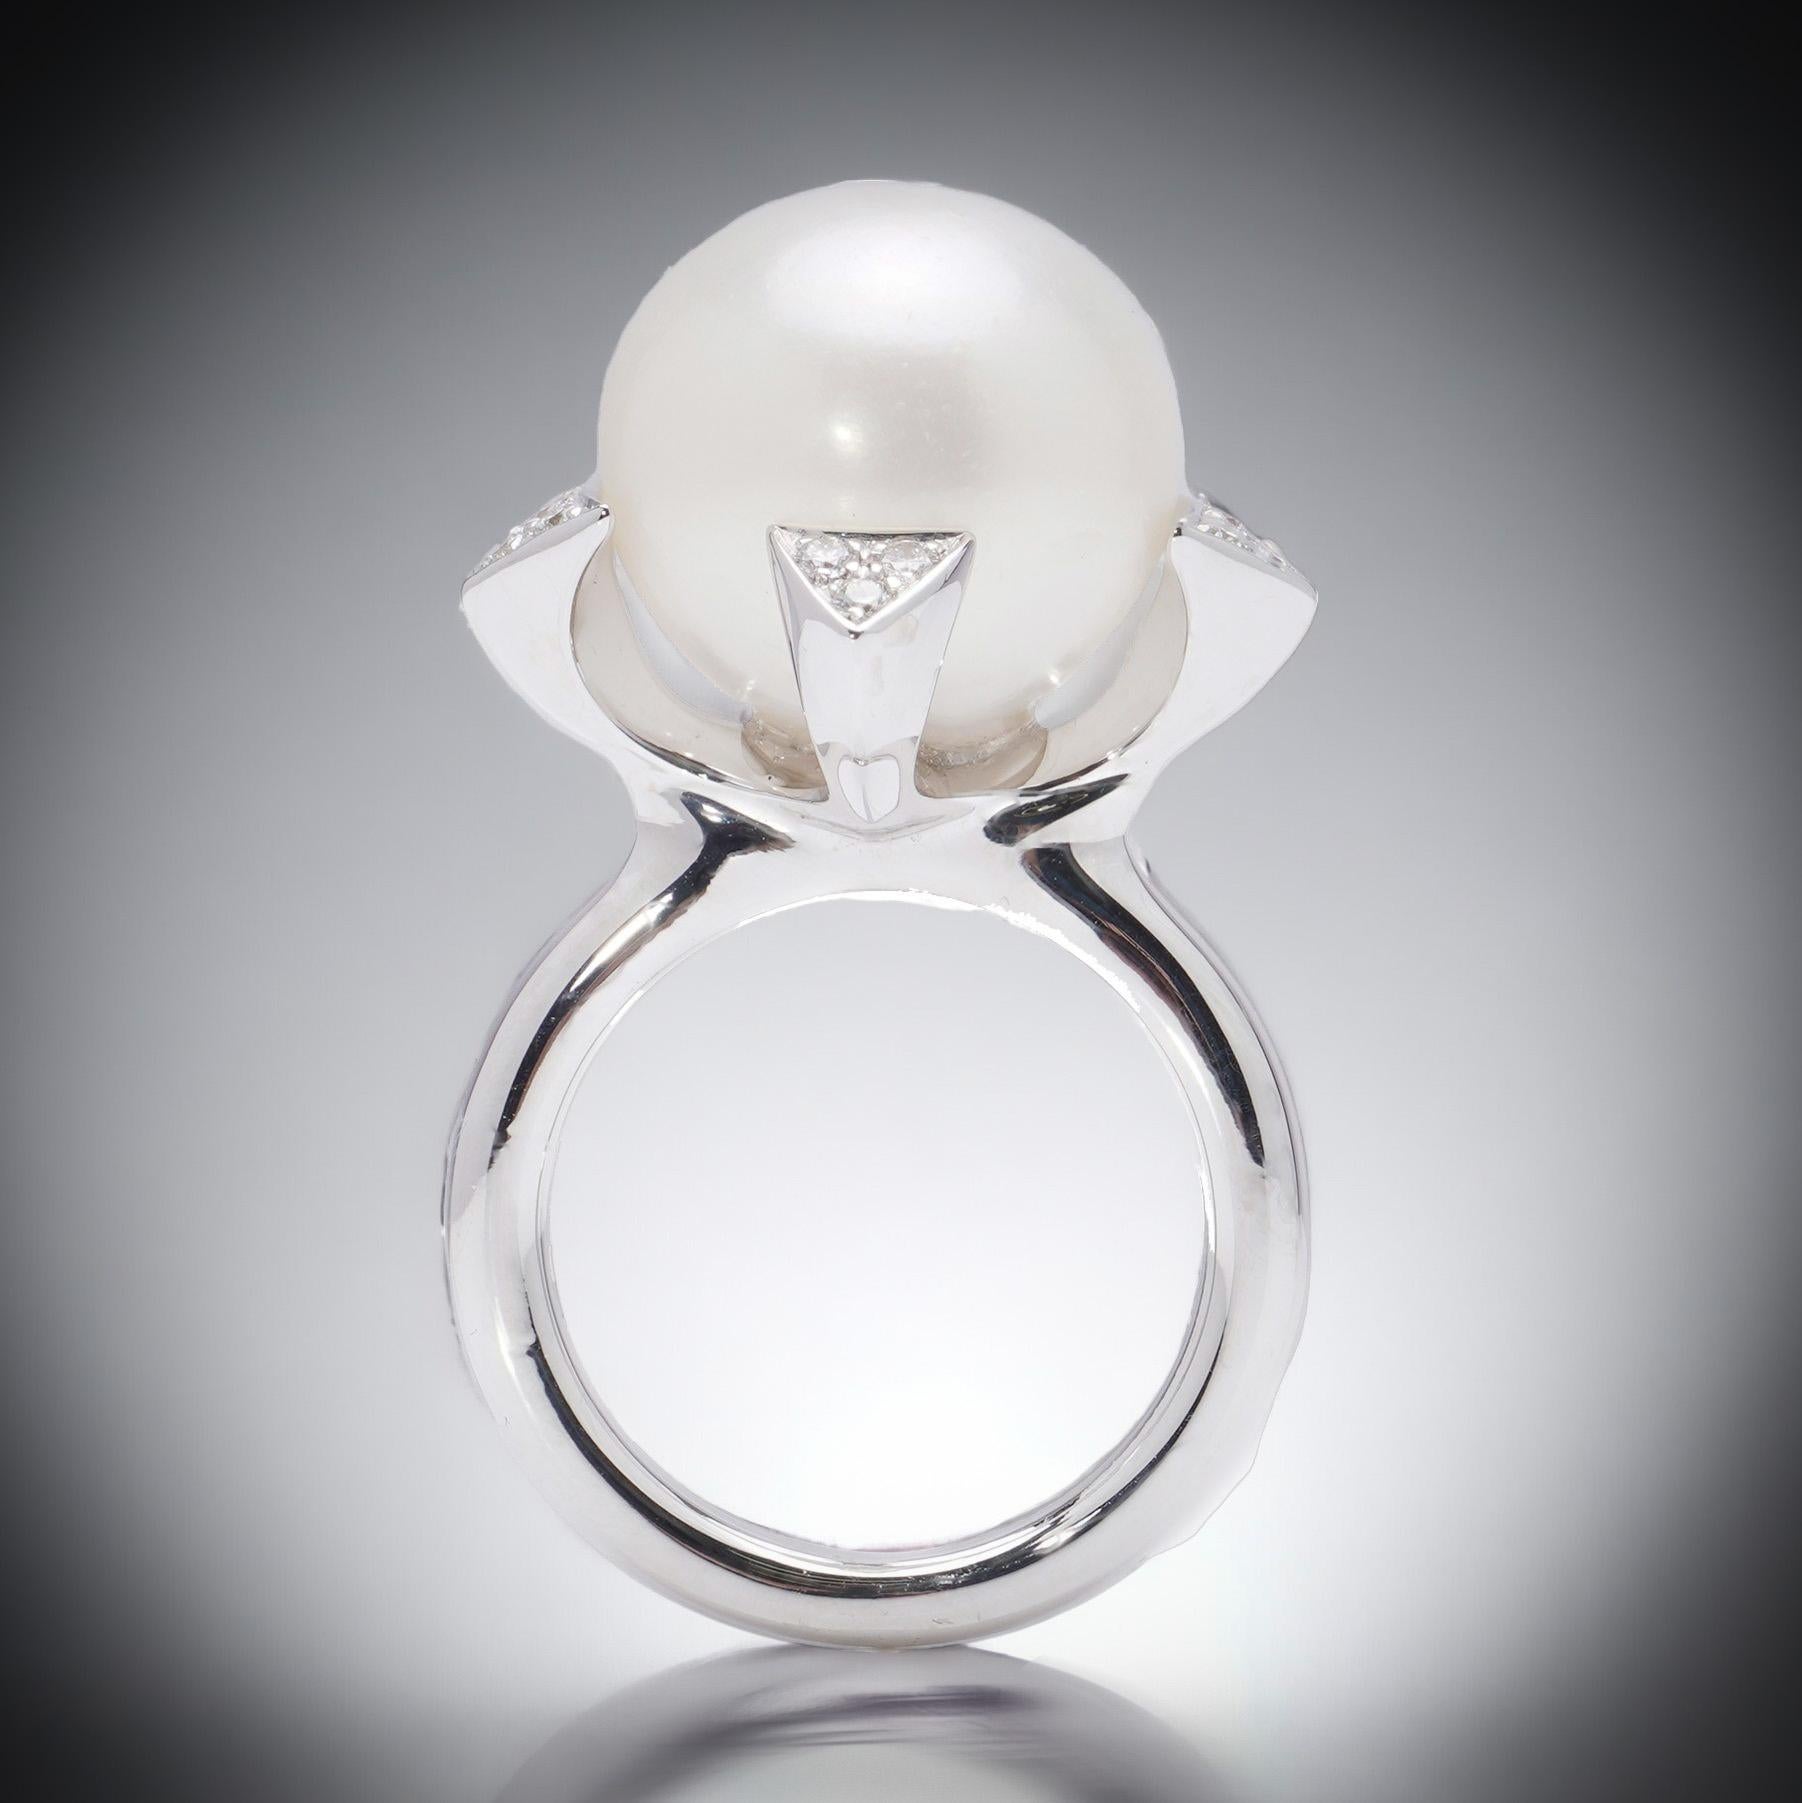 Utopia 18kt. white gold Akoya cultured pearl cocktail ring.
Designer: Utopia
Made in Italy, after 2000
Hallmarked with 750 mark and Brand's logo and Italian hallmarks.

It was October 2, 1996 when Paolo Gaia, guided by the desire to reinterpret